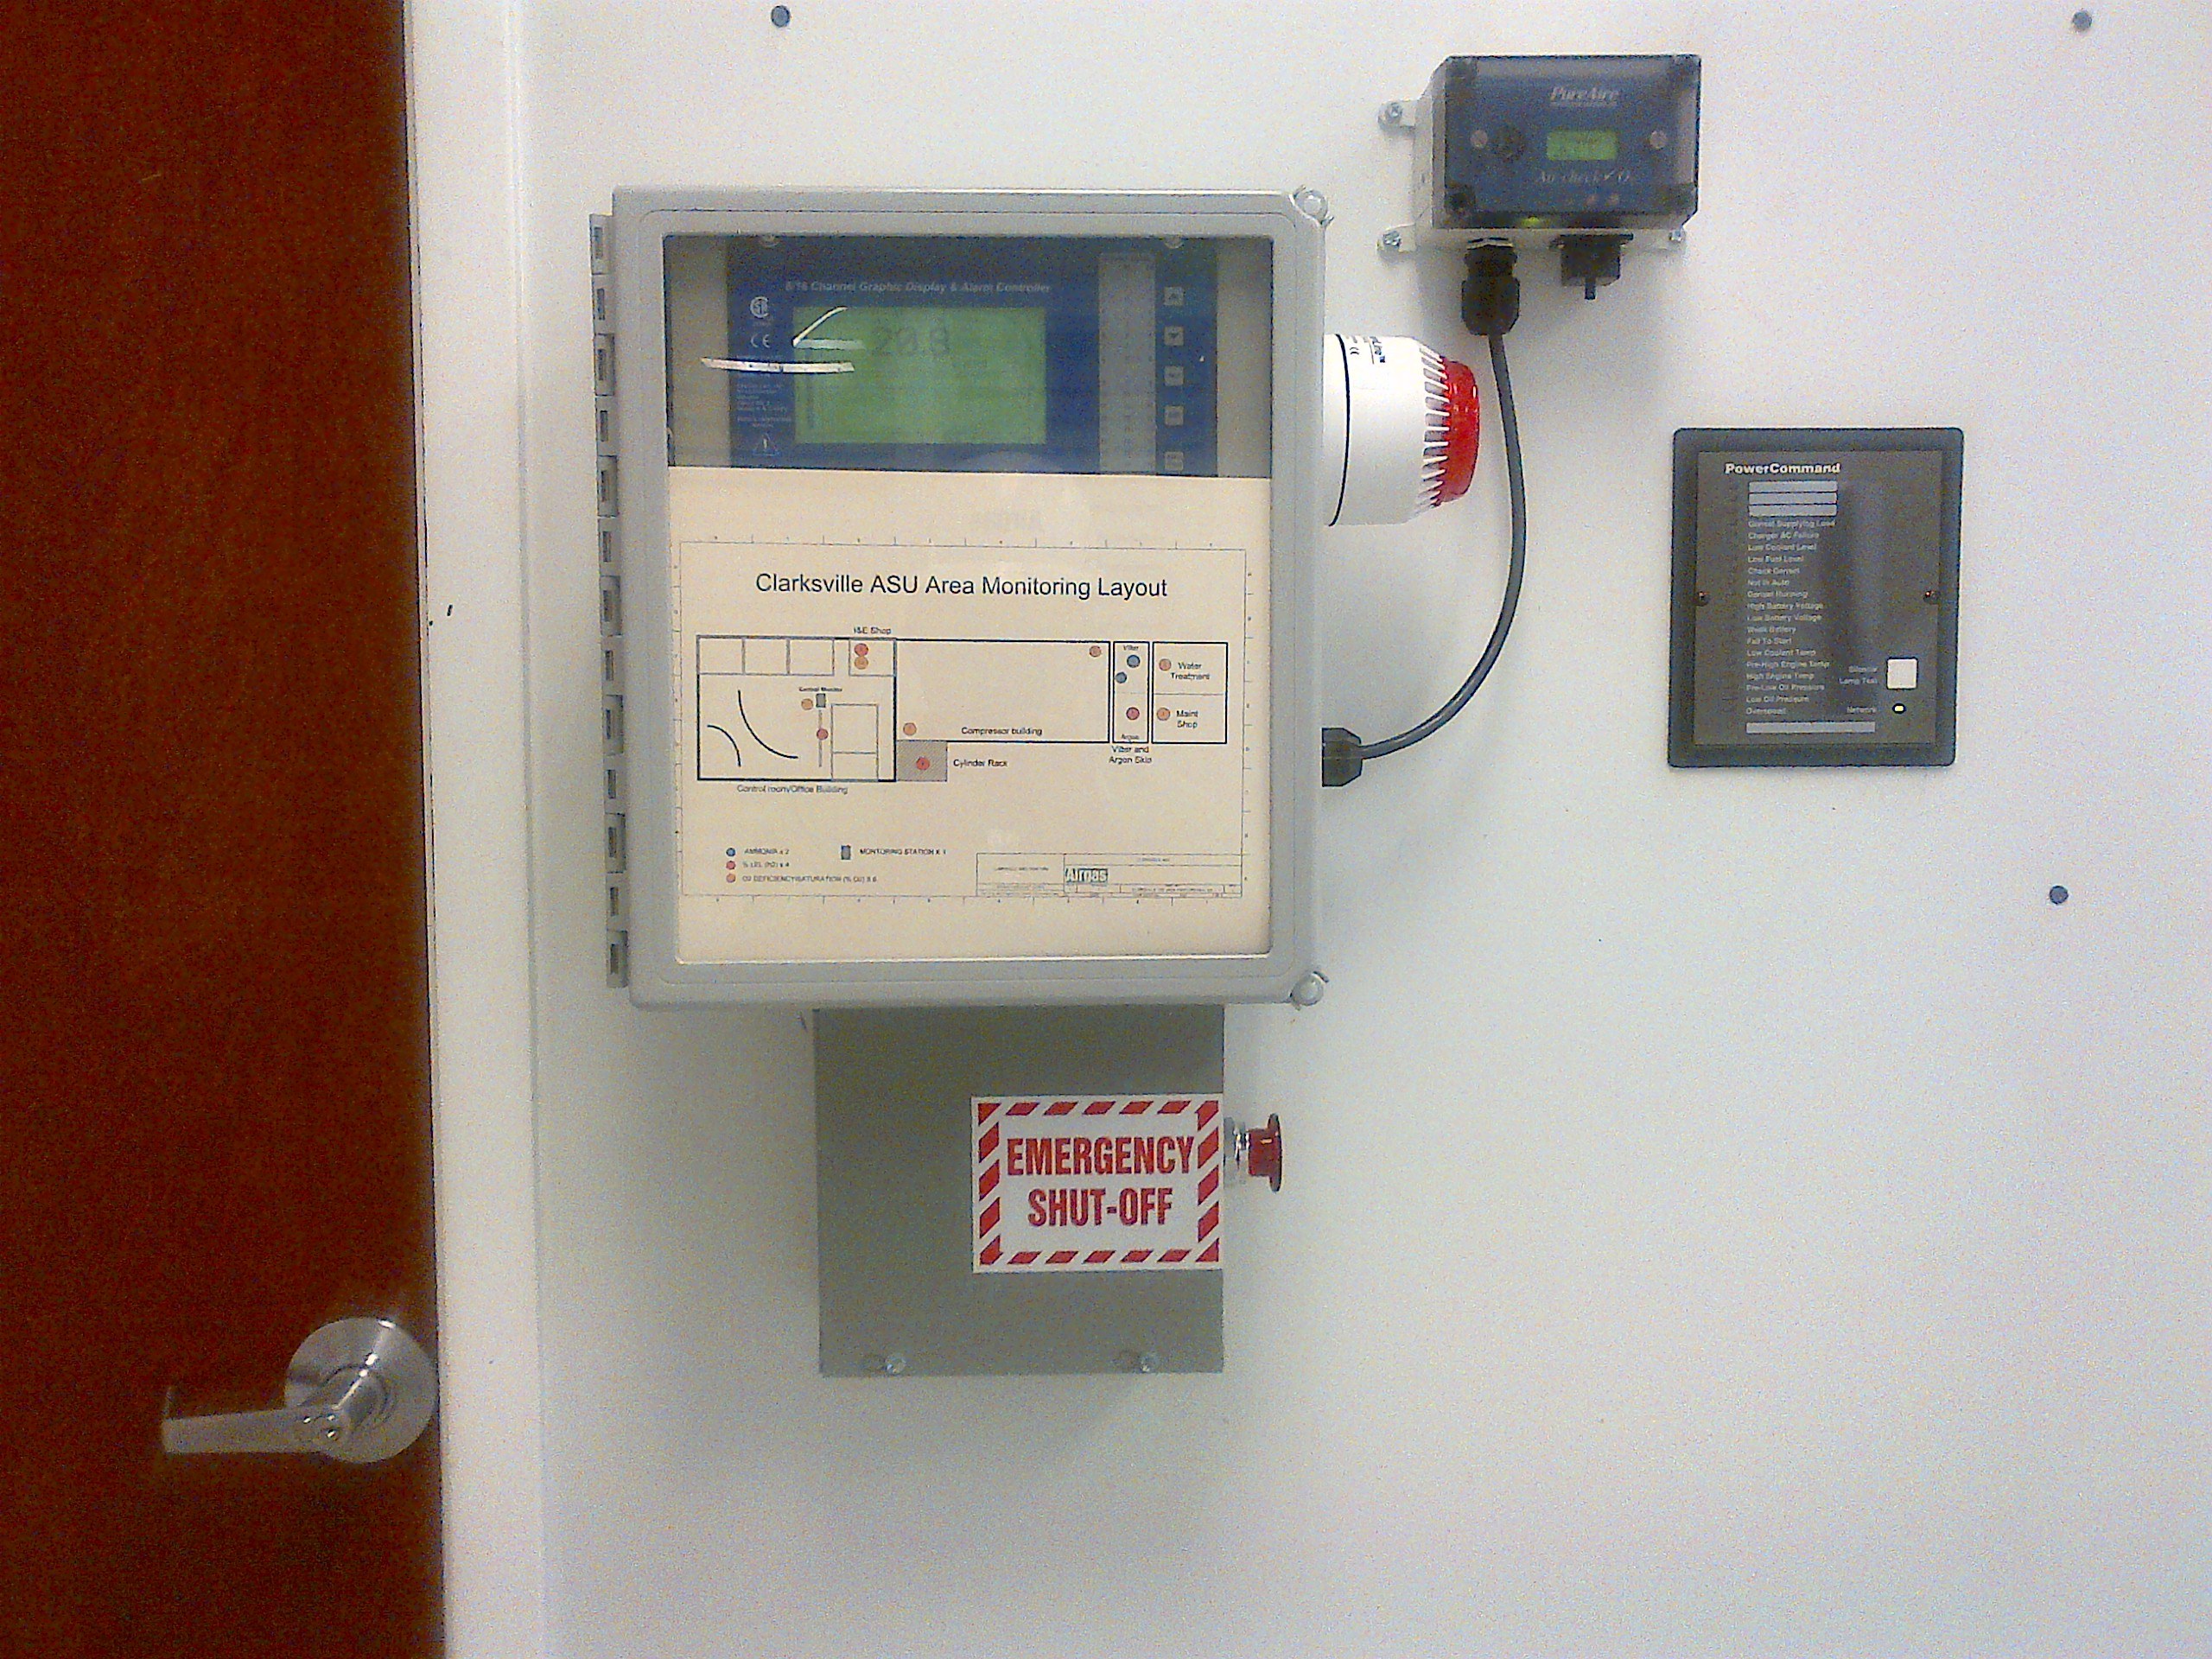 3350 Control Room Oxygen Monitor